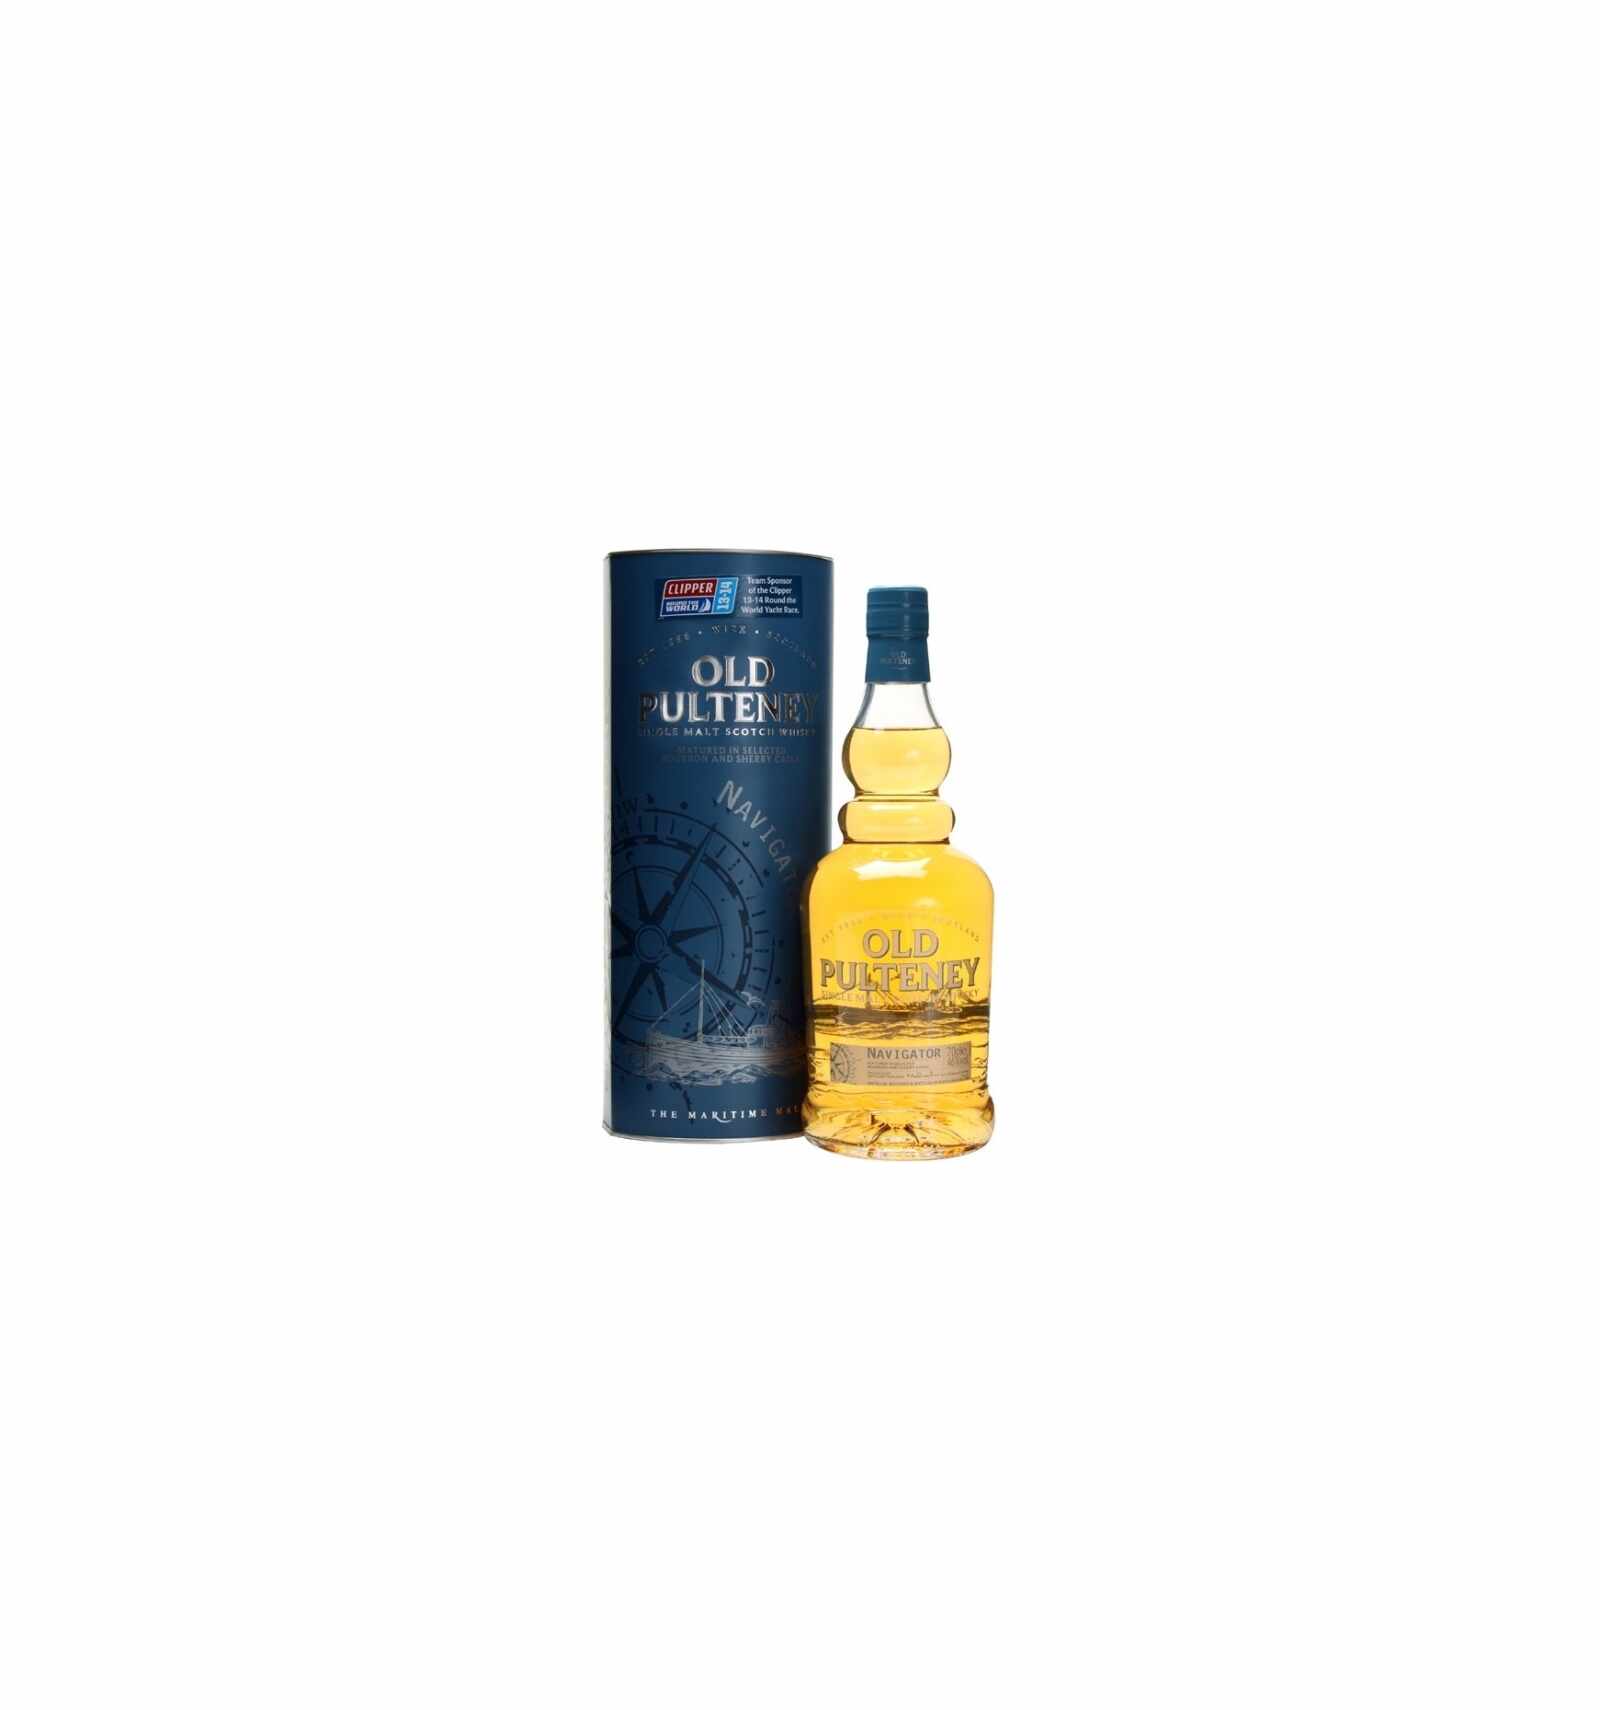 Whisky Old Pulteney Navigator, 46% alc., 0.7L, Scotia